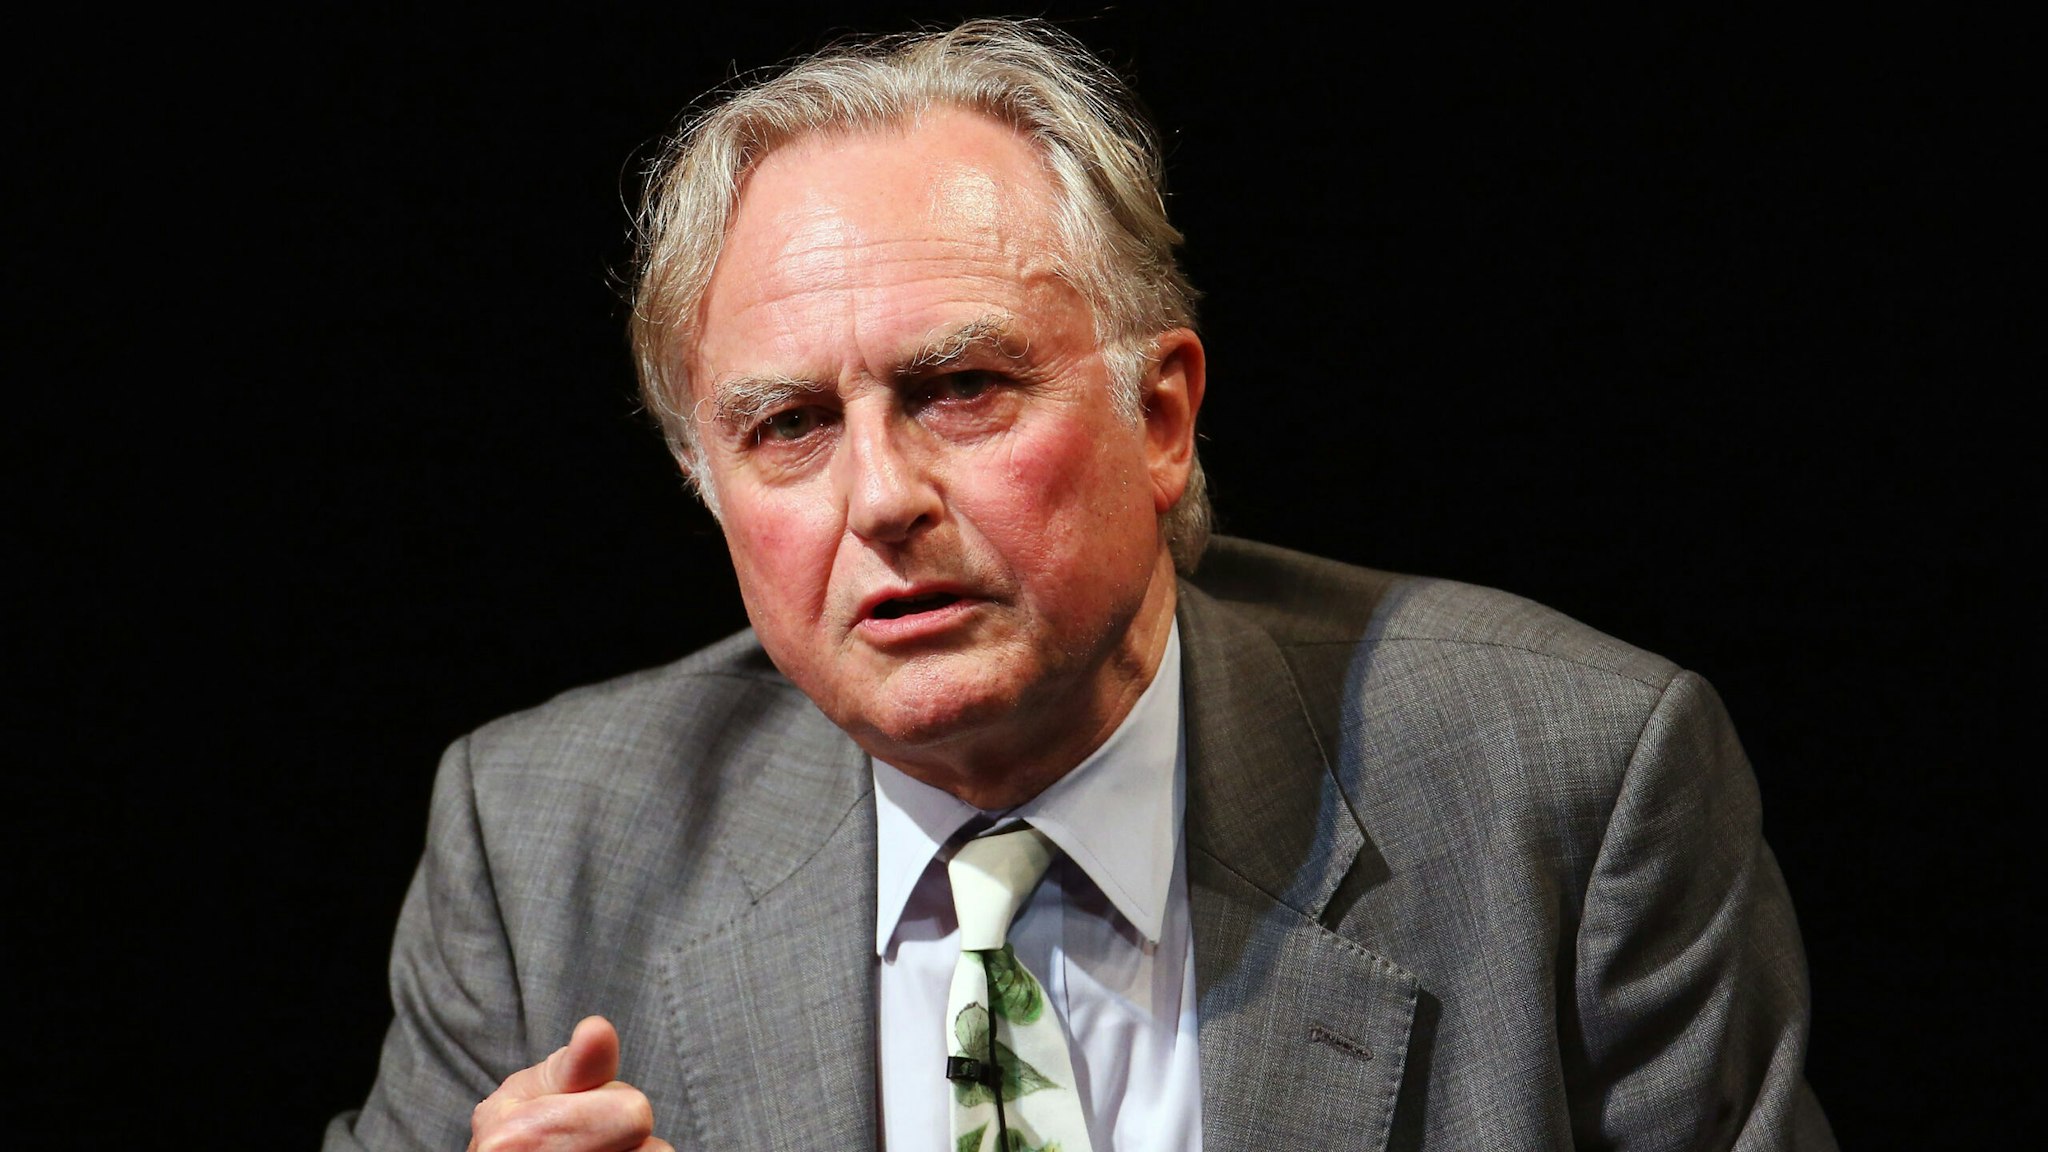 SYDNEY, AUSTRALIA - DECEMBER 04: Richard Dawkins, founder of the Richard Dawkins Foundation for Reason and Science,promotes his new book at the Seymour Centre on December 4, 2014 in Sydney, Australia. Richard Dawkins is well known for his criticism of intelligent design.